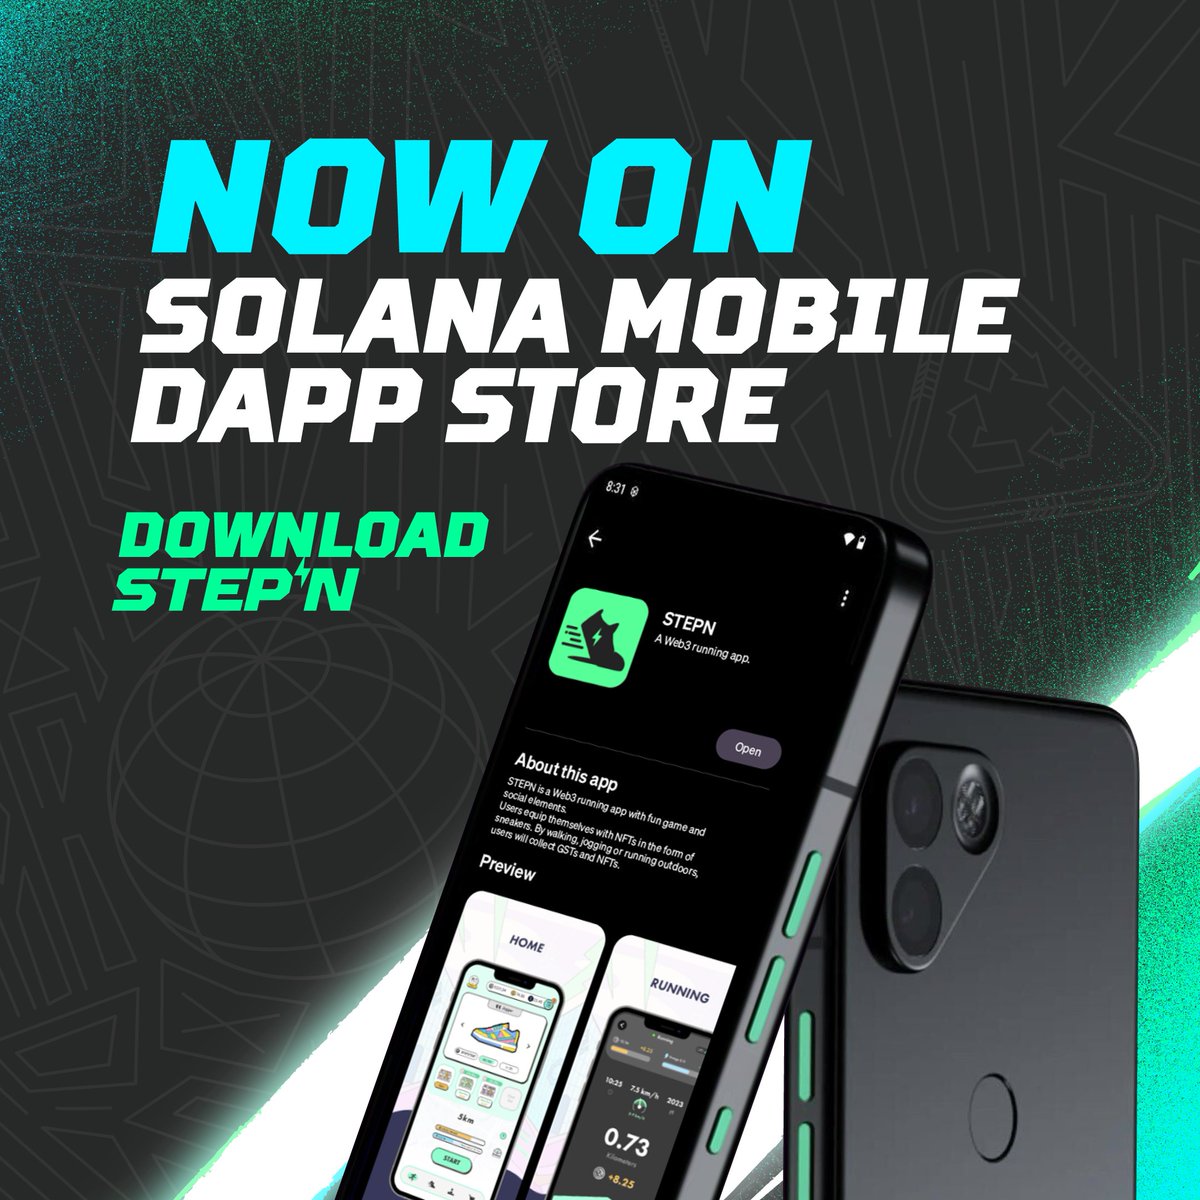 📞 Incoming call: @solanamobile As you guessed, we're thrilled to announce our introduction to the @solanamobile dApp Store📱 From NOW, you can download STEPN on the dApp Store for an immersive Web3 experience! 🎉 More to come very soon, stay tuned to not miss the next call 👀